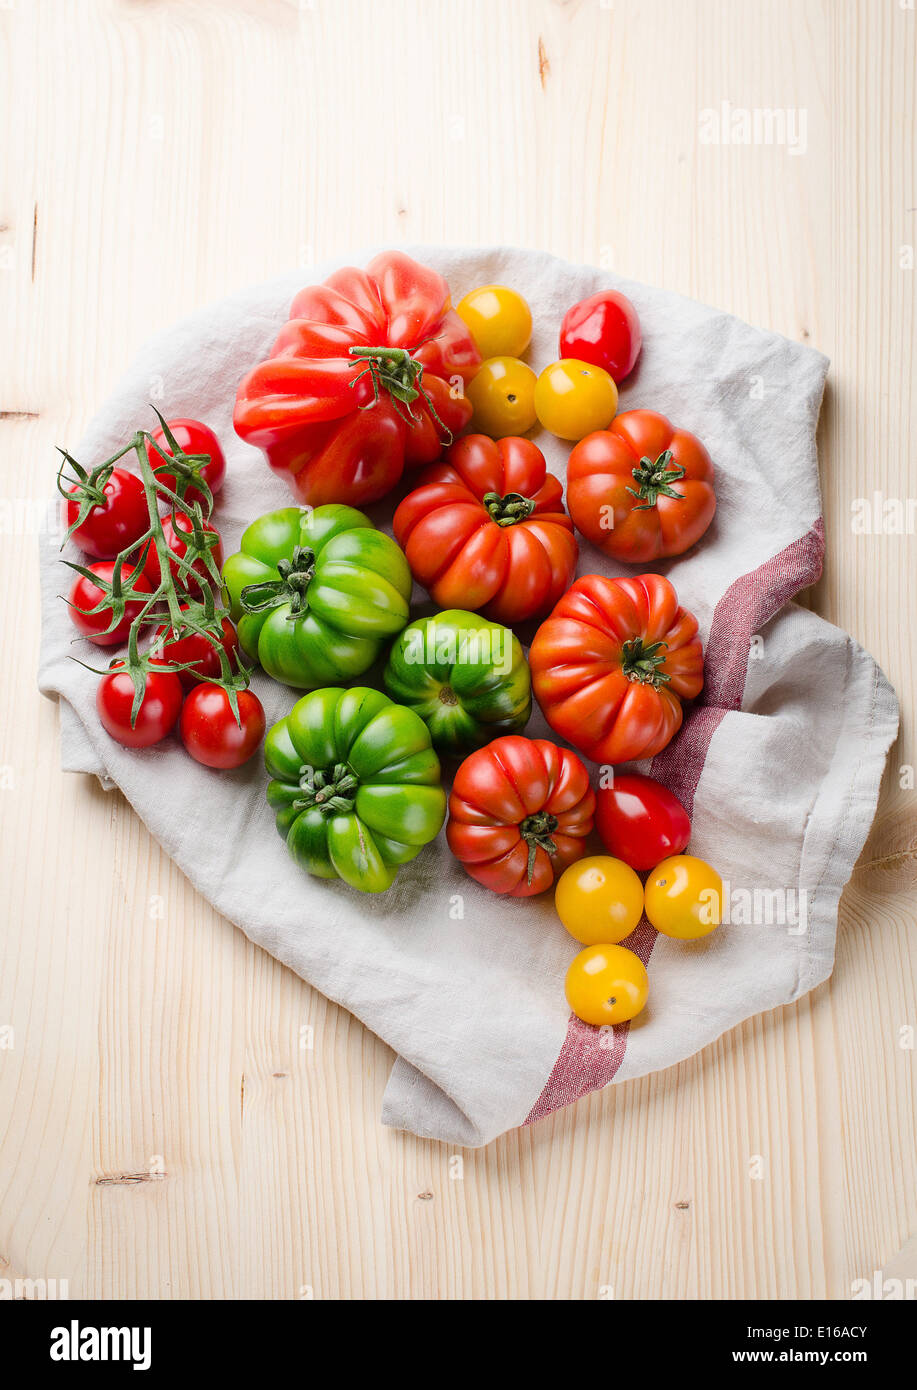 Fresh green and red tomatoes Stock Photo